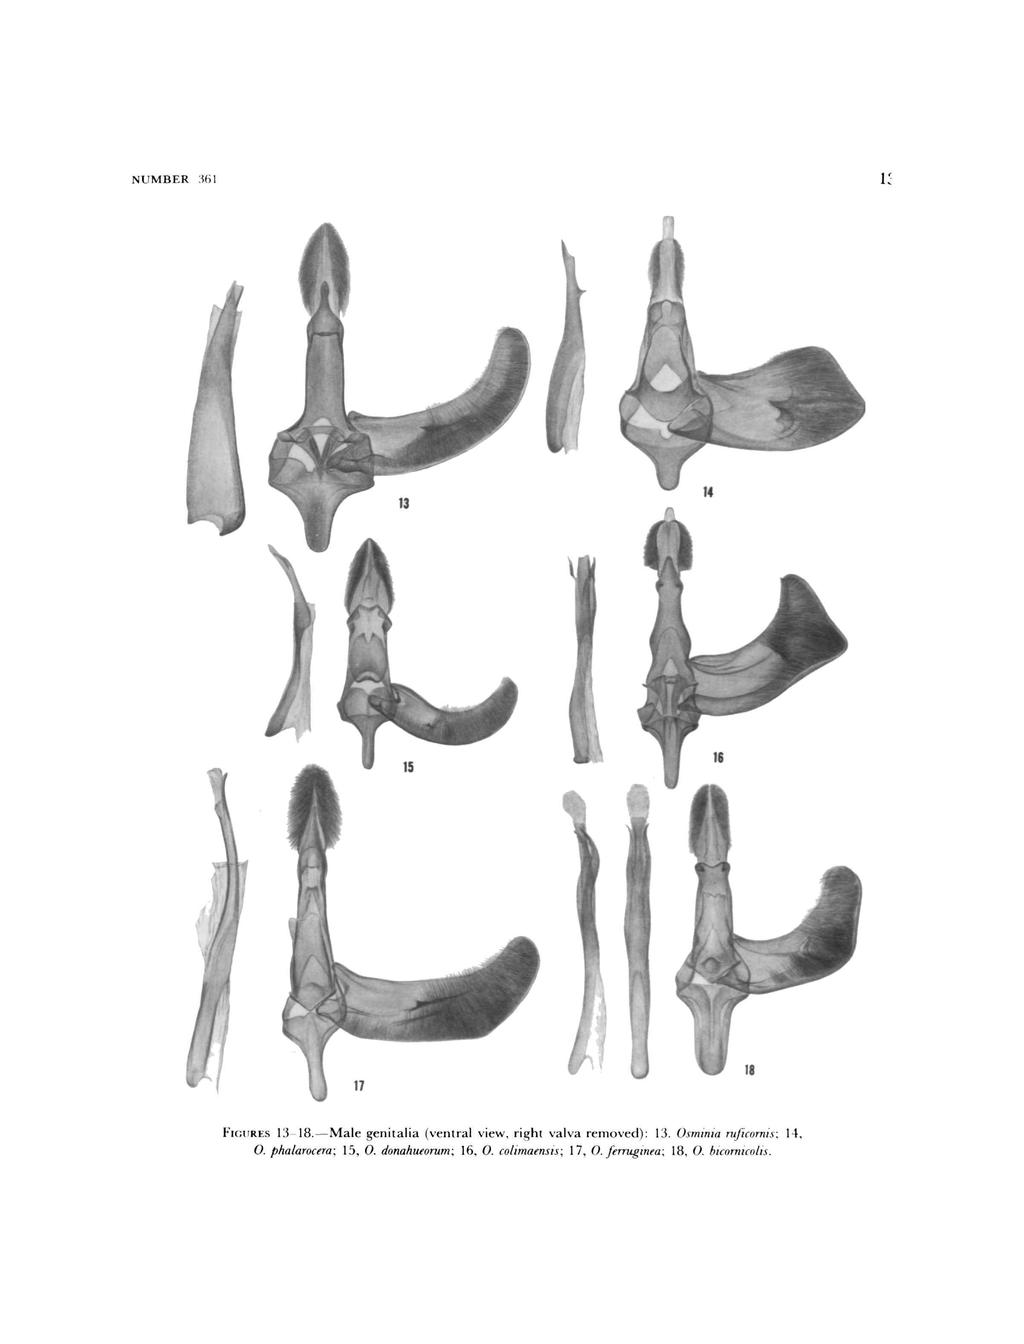 NUMBER :?61 FIGURES 13-18. Male genitalia (ventral view, right valva removed): 13.